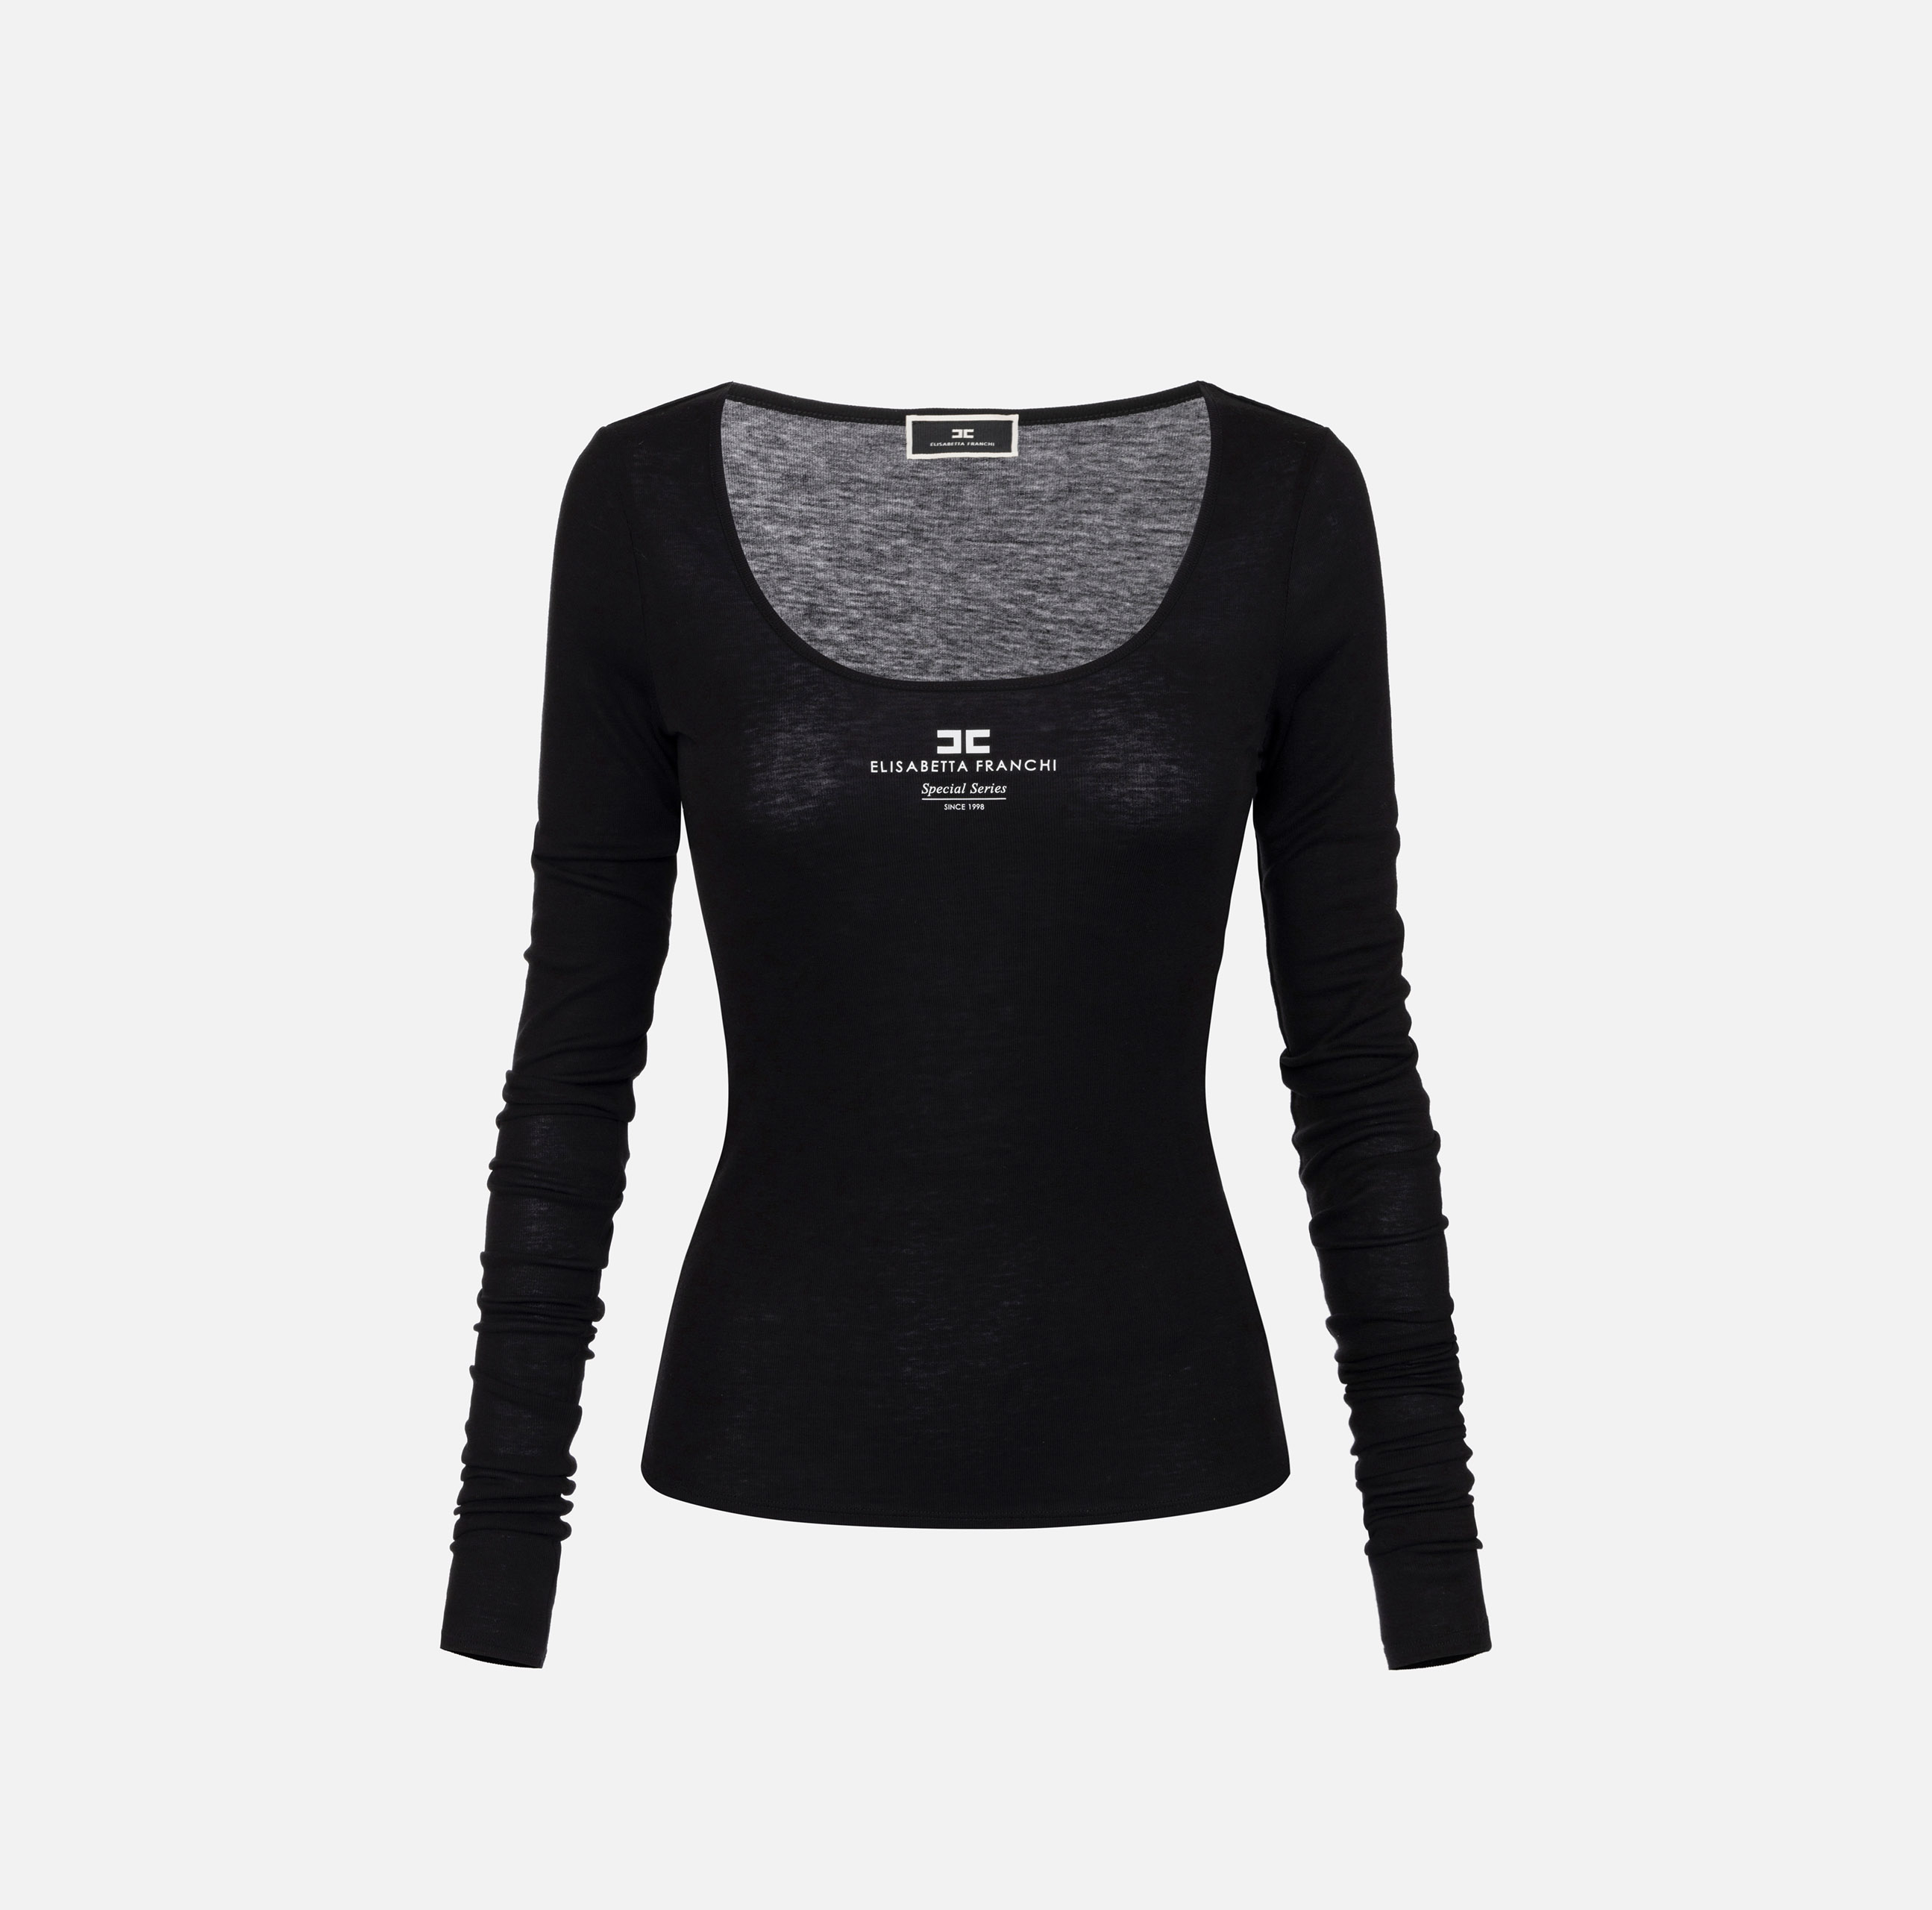 Wool and jersey top with logo - ABBIGLIAMENTO - Elisabetta Franchi